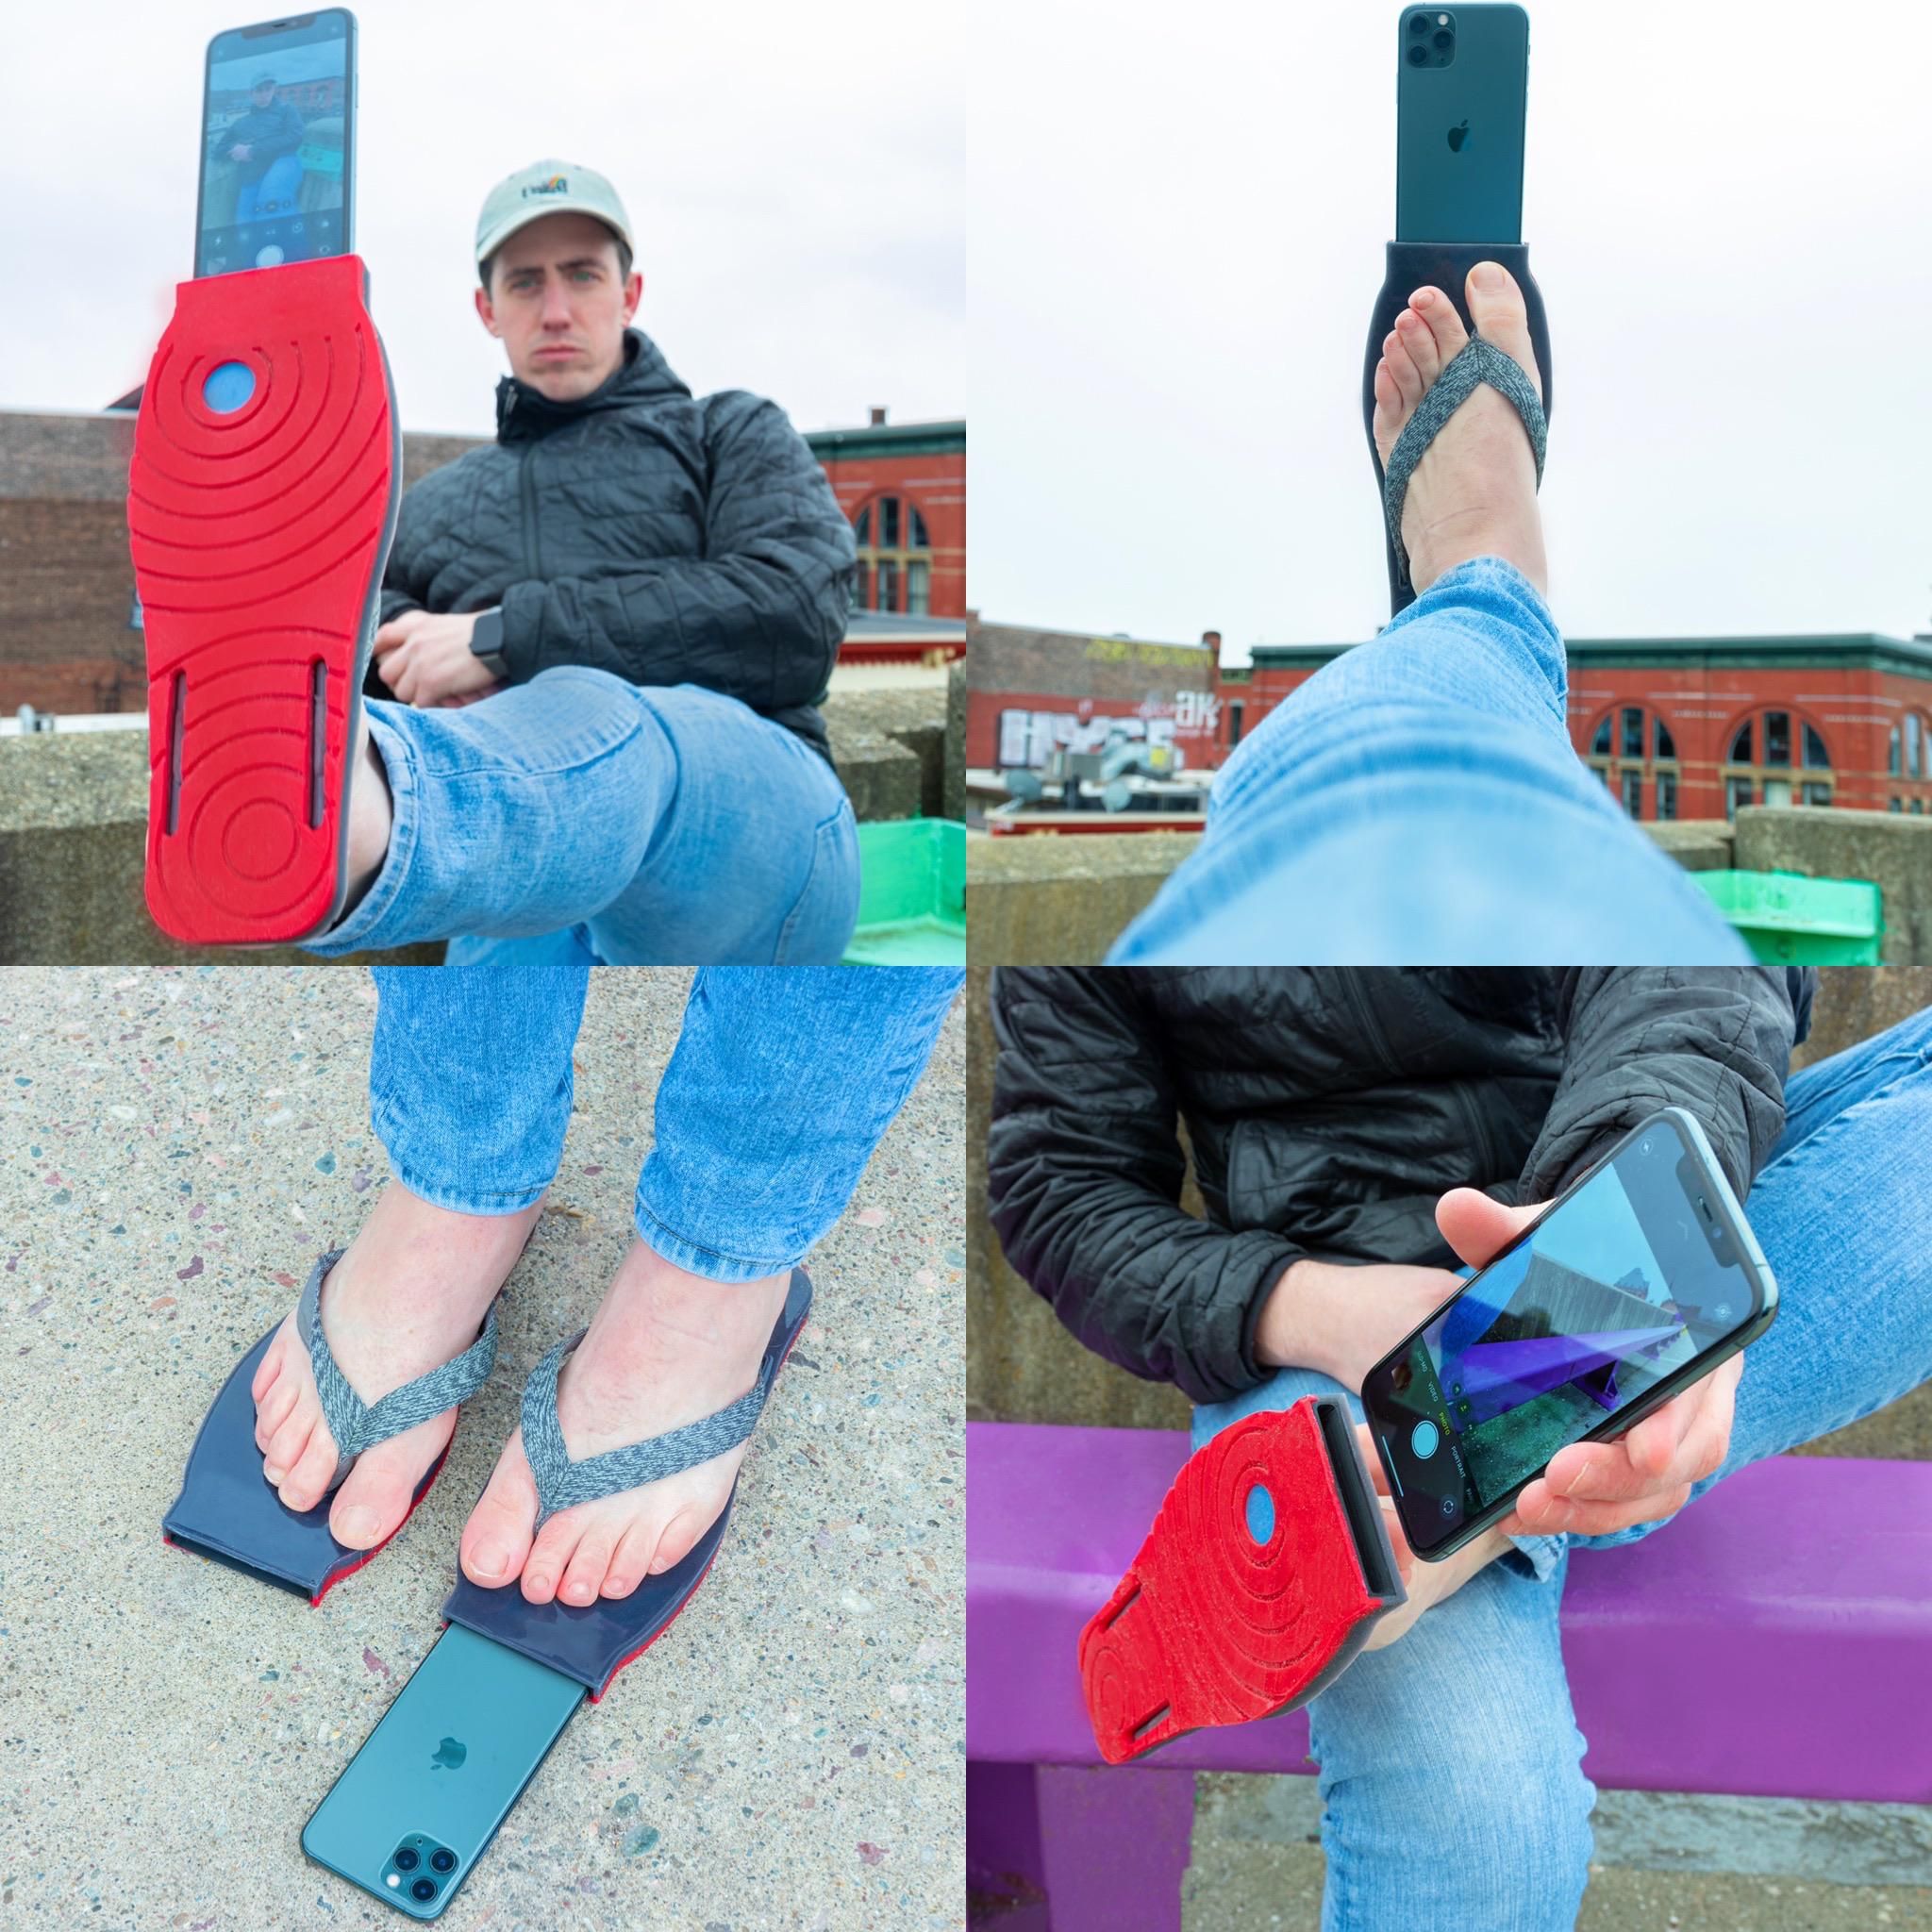 I like to design fake products, meet me newest creation. The Selfie Sandals.